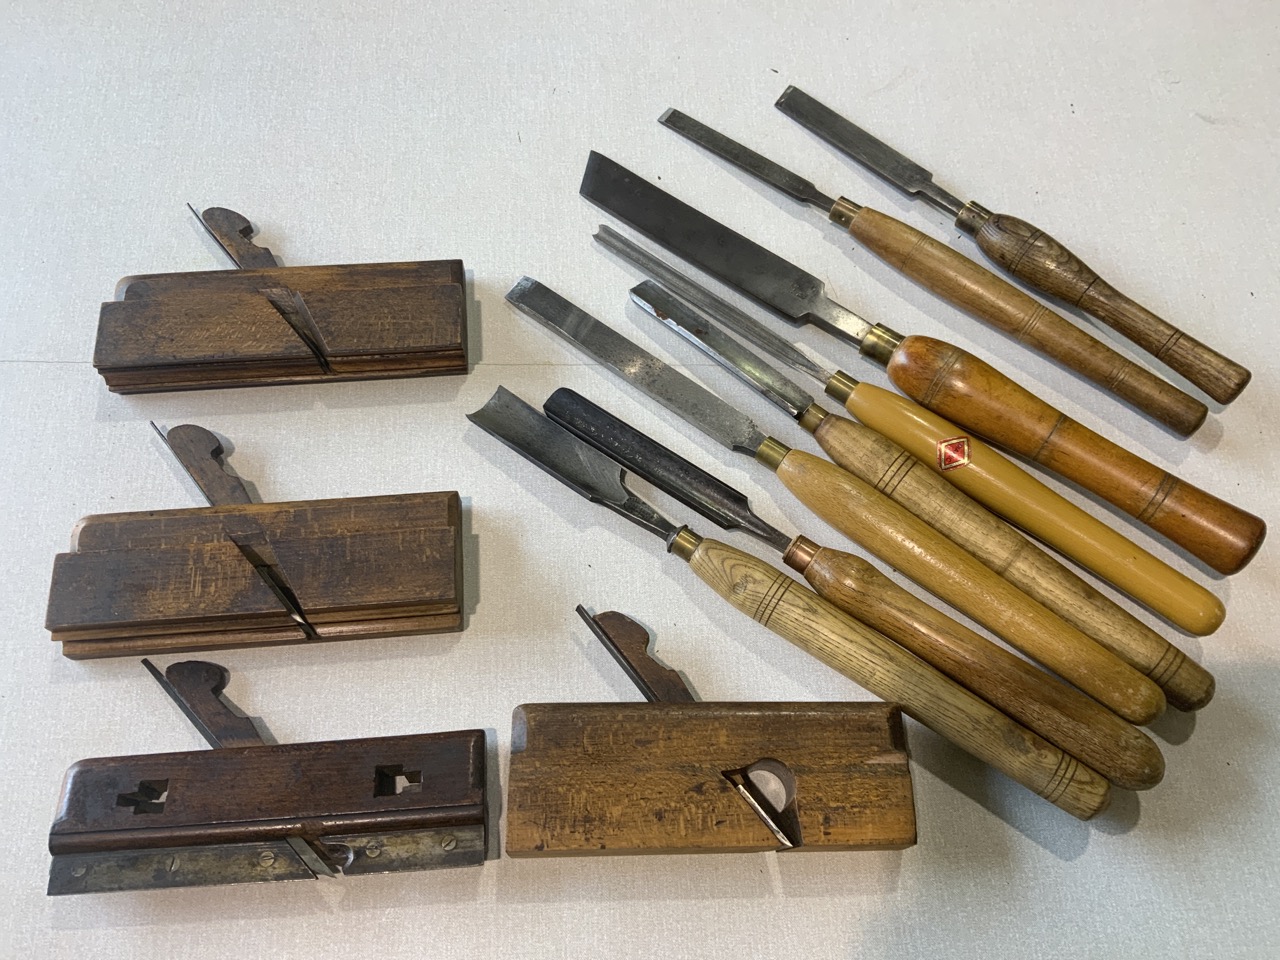 A selection of woodworkers chisels tools, Diamic, Staples, J W Smith etc.